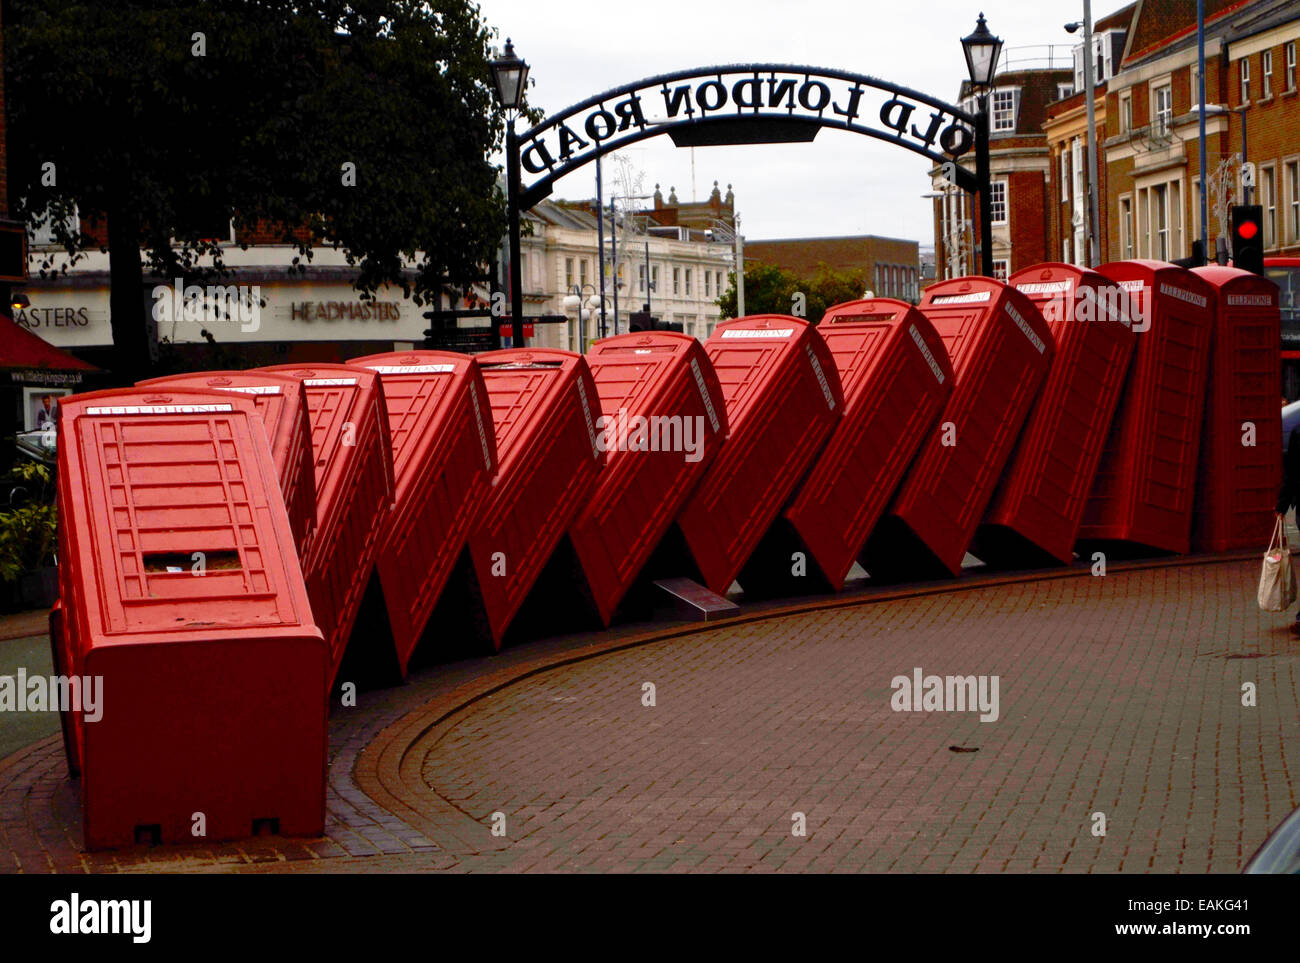 Kingston's falling over telephone boxes, by David Mach. Stock Photo